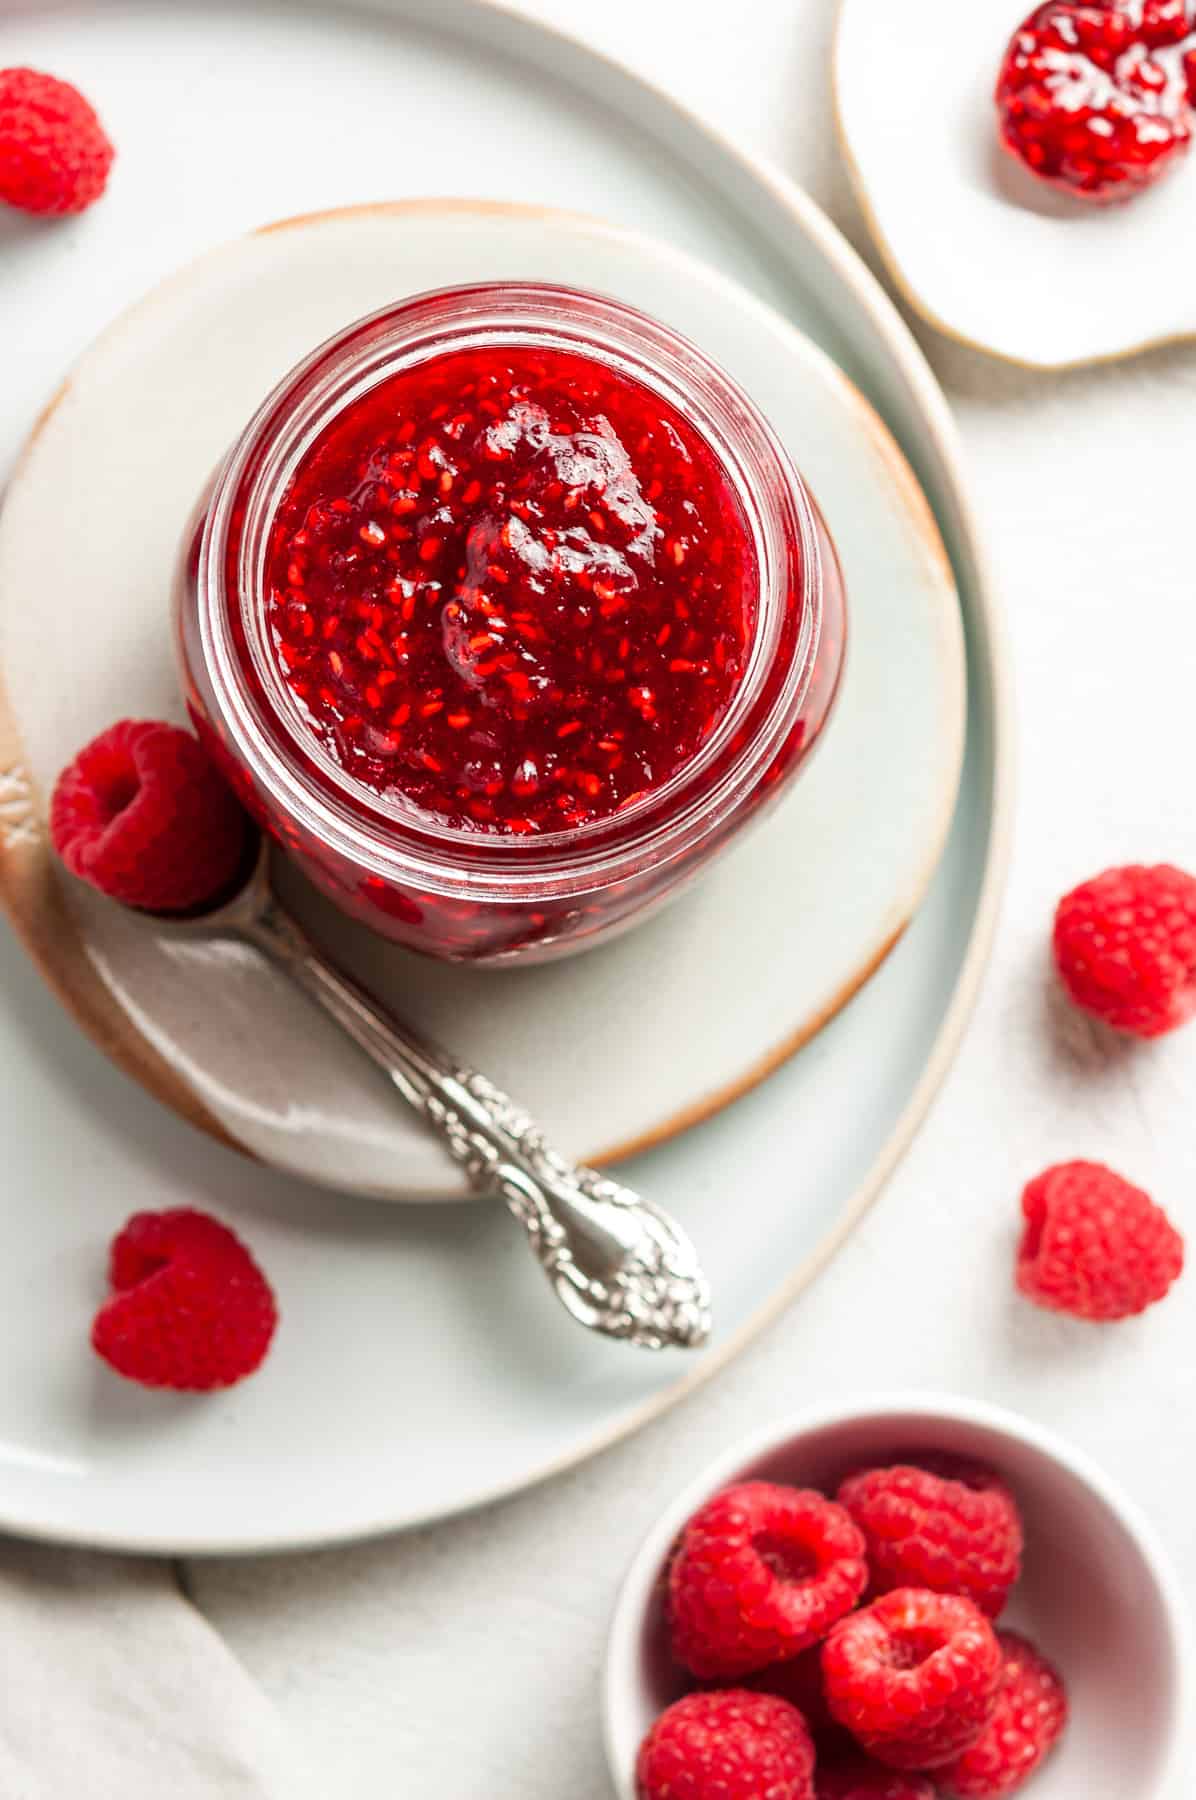 Overhead shot of open jar of jam, sitting on a plate, with a spoon and some raspberries on the edge.